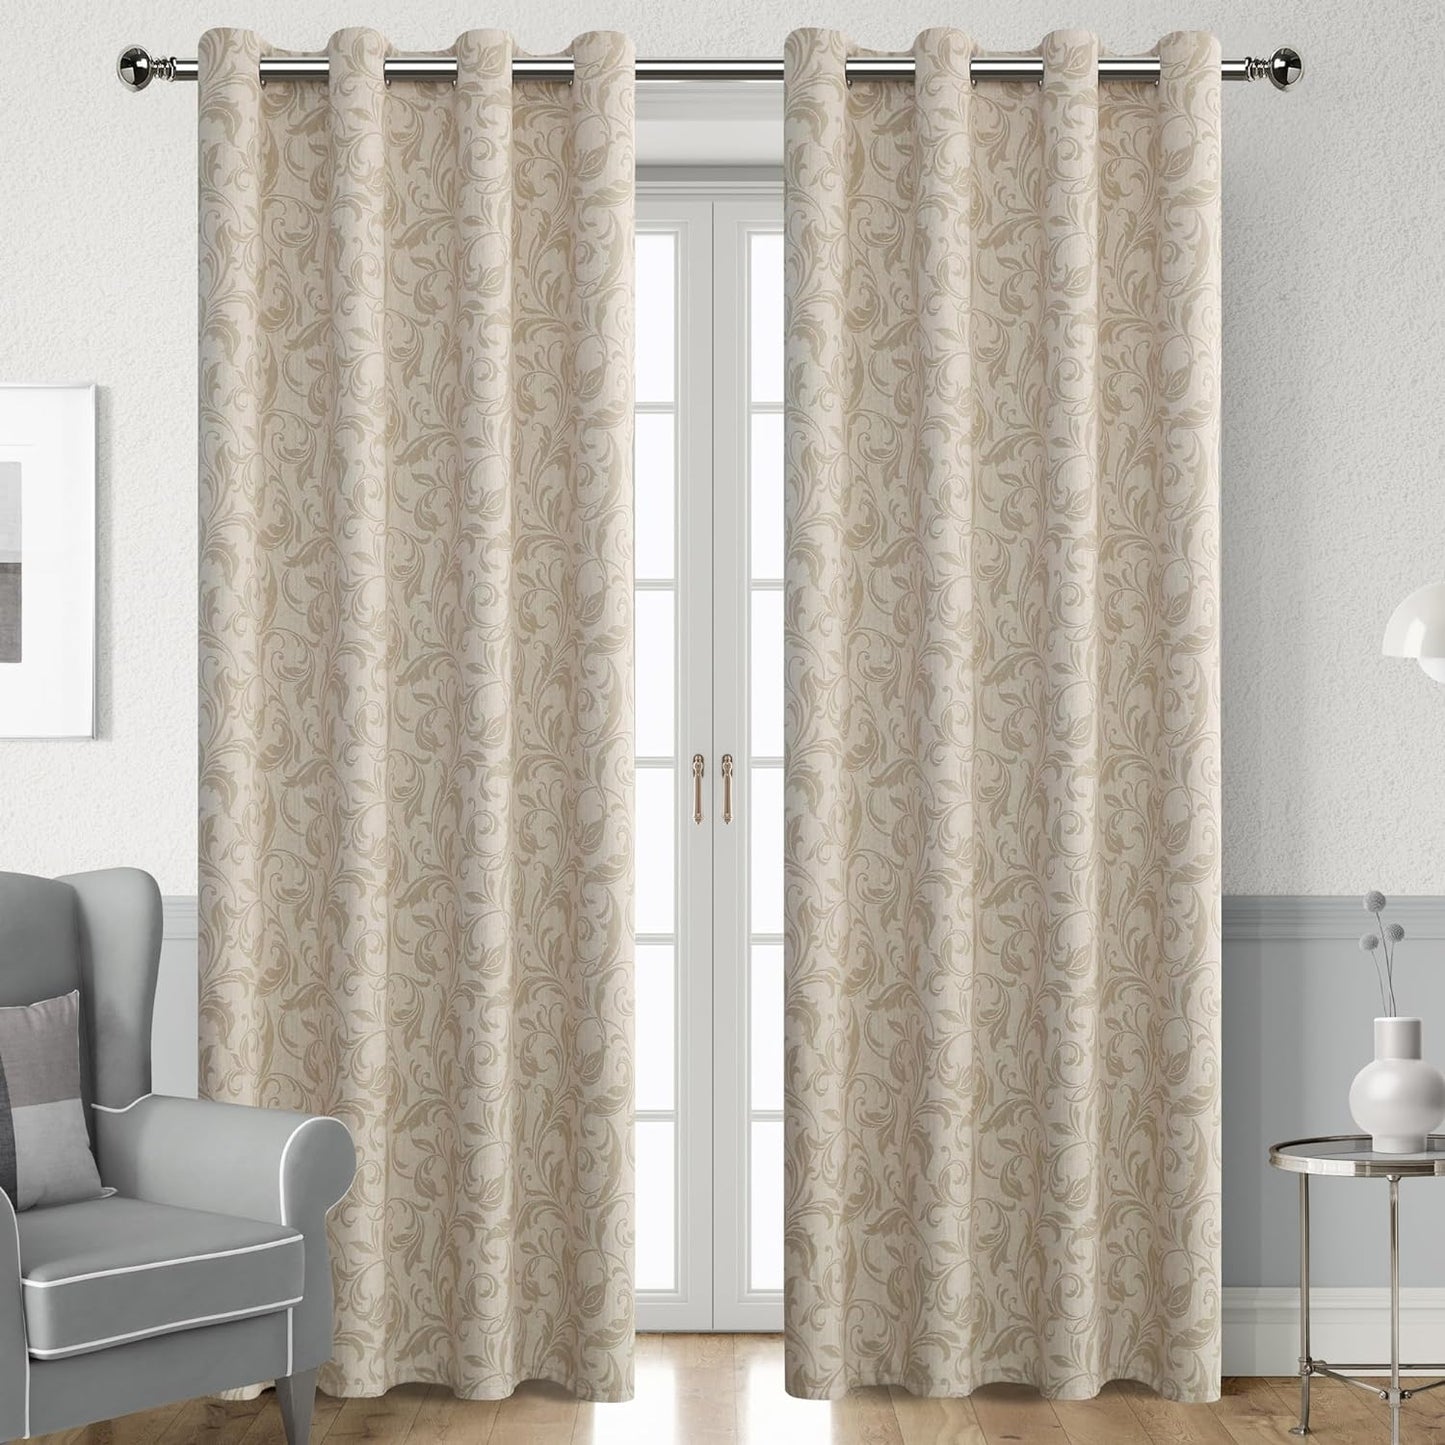 Erbnaryx Vintage Curtains for Farmhouse Living Room,Window Drapes with Scroll Floral Pattern,80% Blackout Curtains for Bedroom,Grommet Top Thermal Insulated Curtains 52X96 Inch 2 Panels Cocoa Bloom  Erbnaryx   